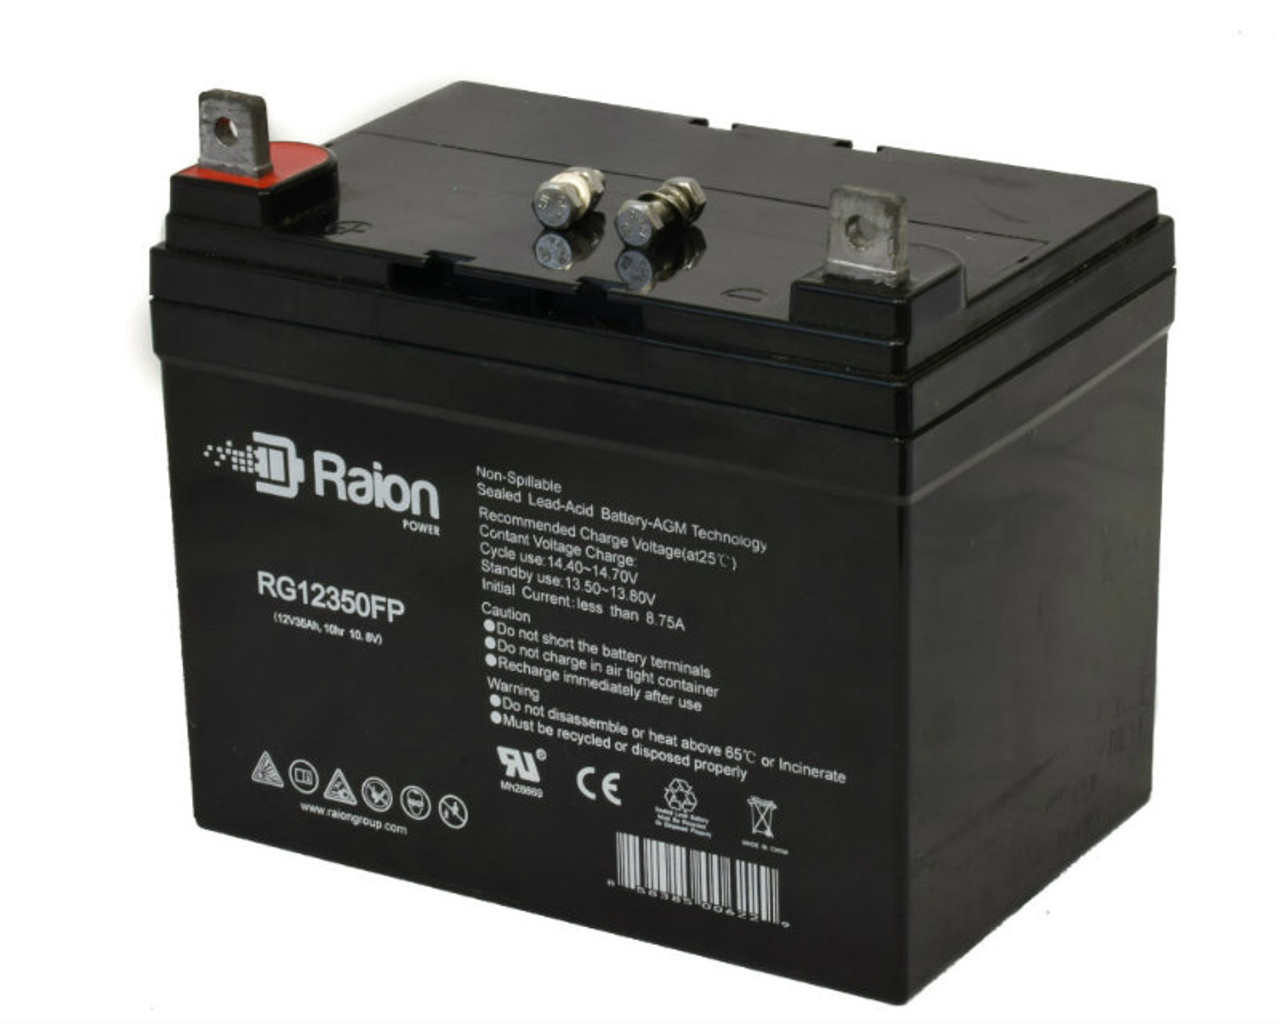 Raion Power Replacement 12V 35Ah RG12350FP Battery for Ingersoll Equipment 226